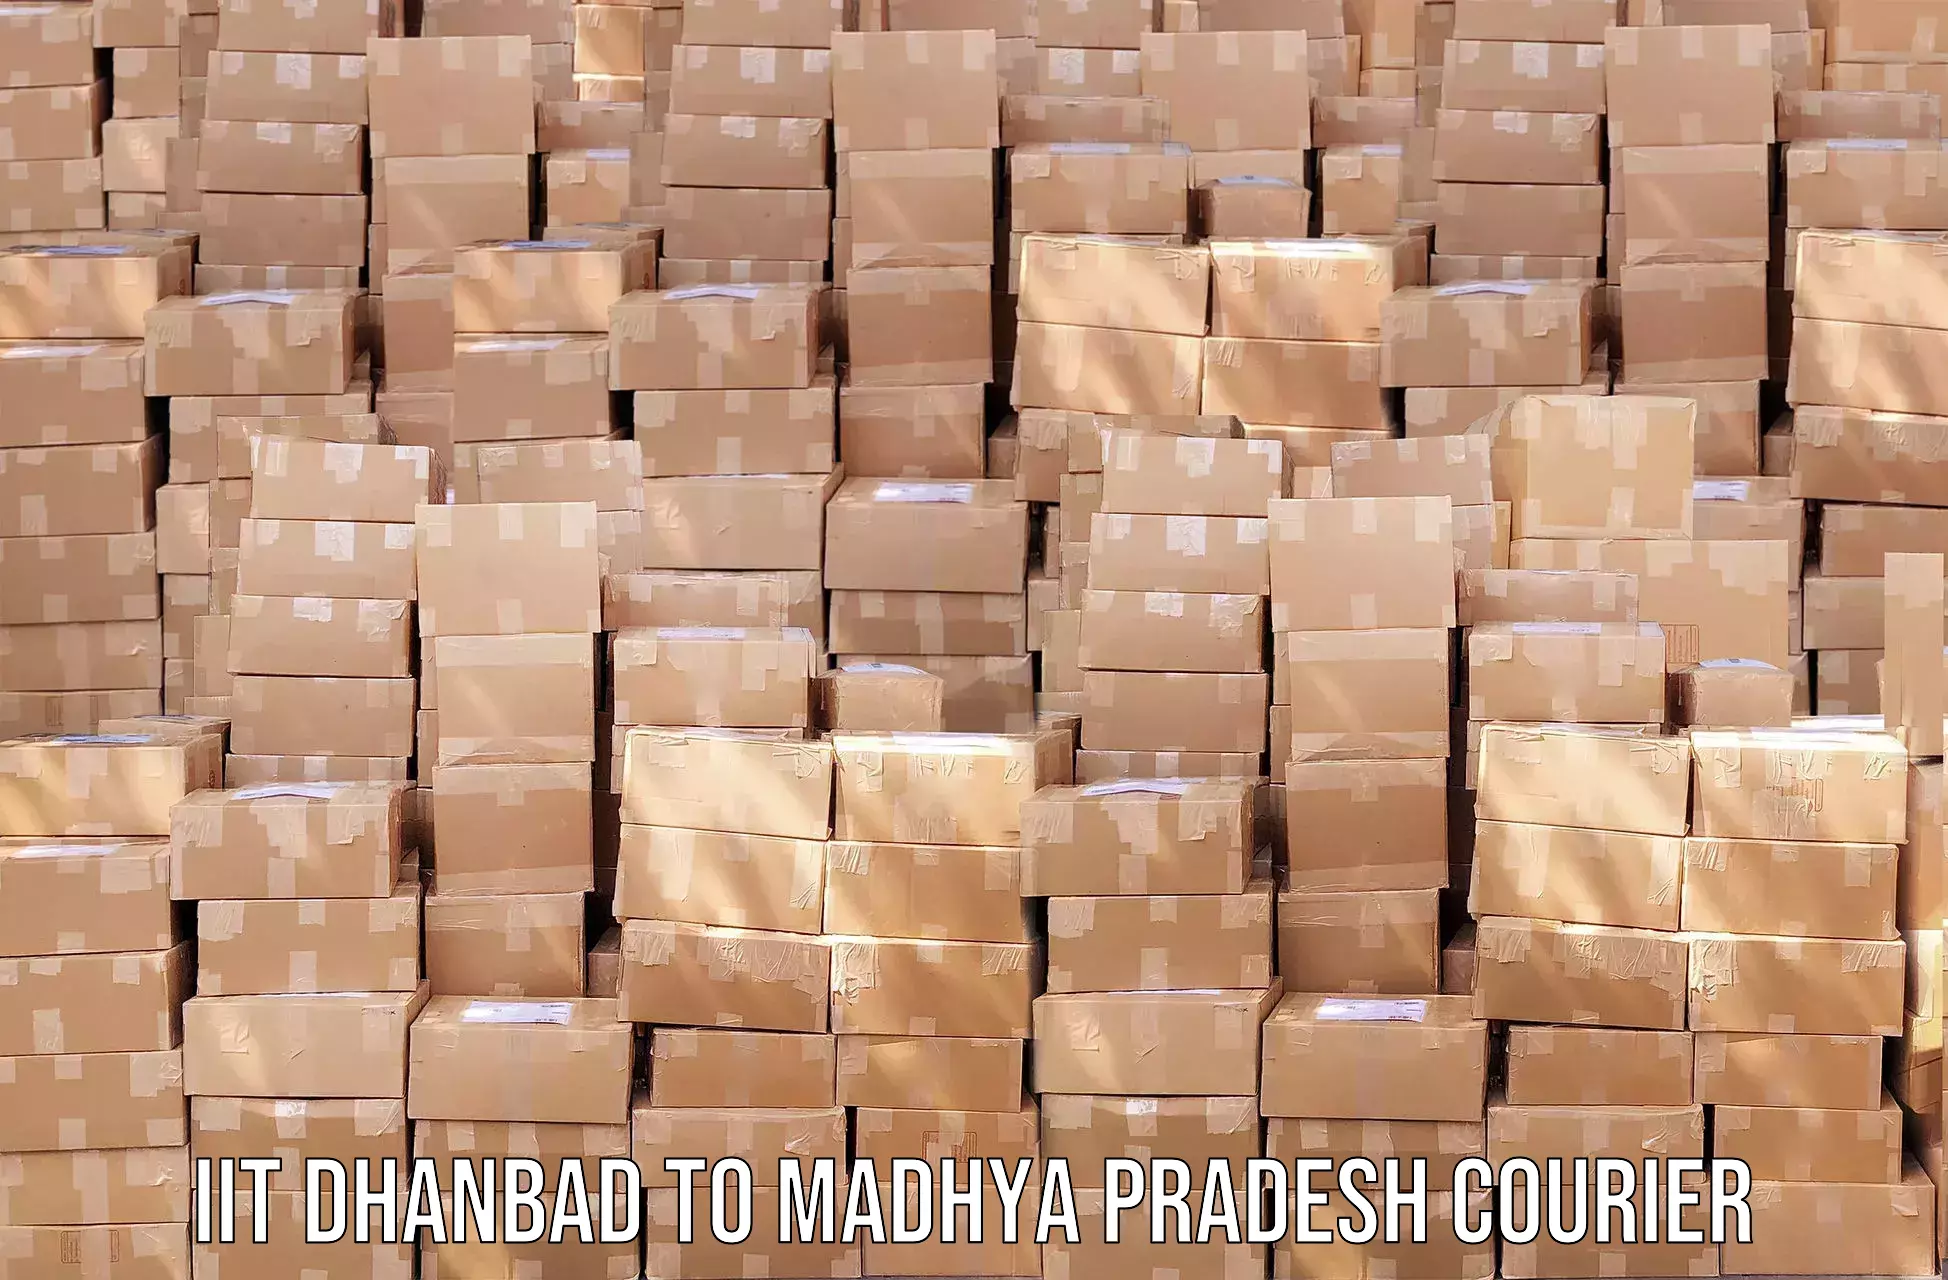 Quality courier partnerships in IIT Dhanbad to Chanderi